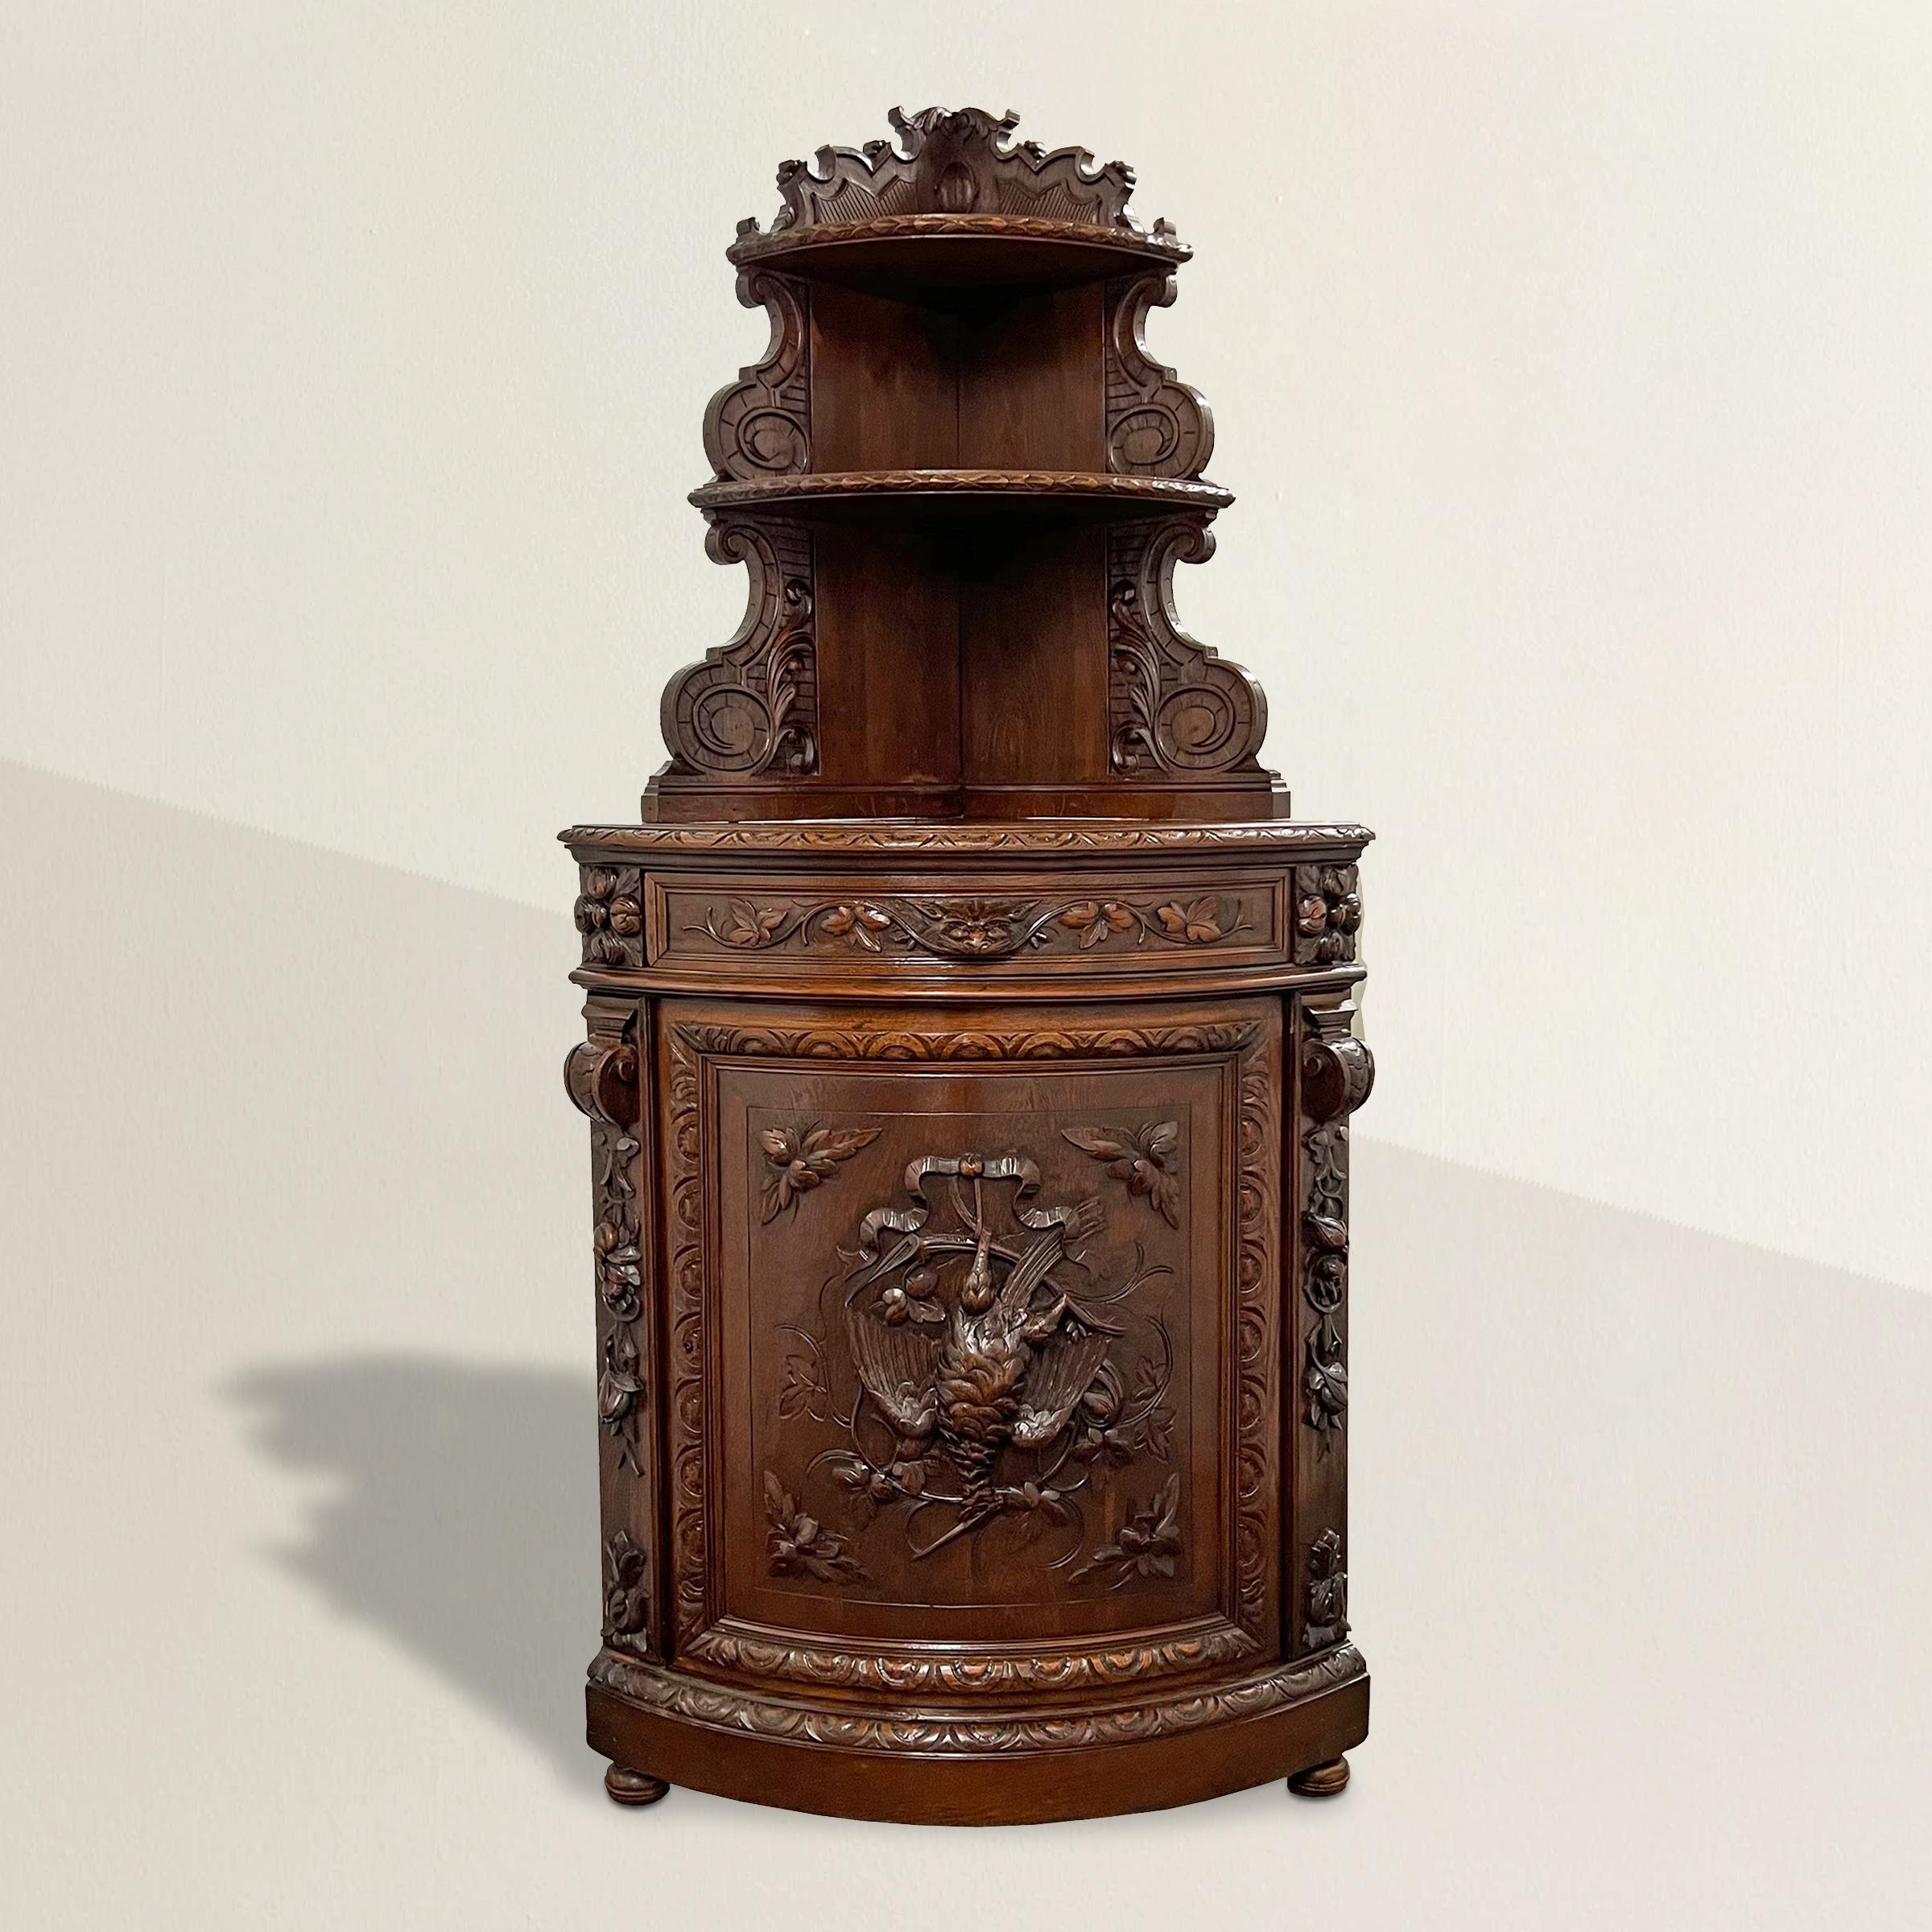 Immerse yourself in the charm of the late 19th century with this exquisite French Renaissance Revival hunt-themed corner cabinet from a hunting lodge. Adorned with intricate, ornate carvings featuring delicate floral and luscious fruit motifs, this